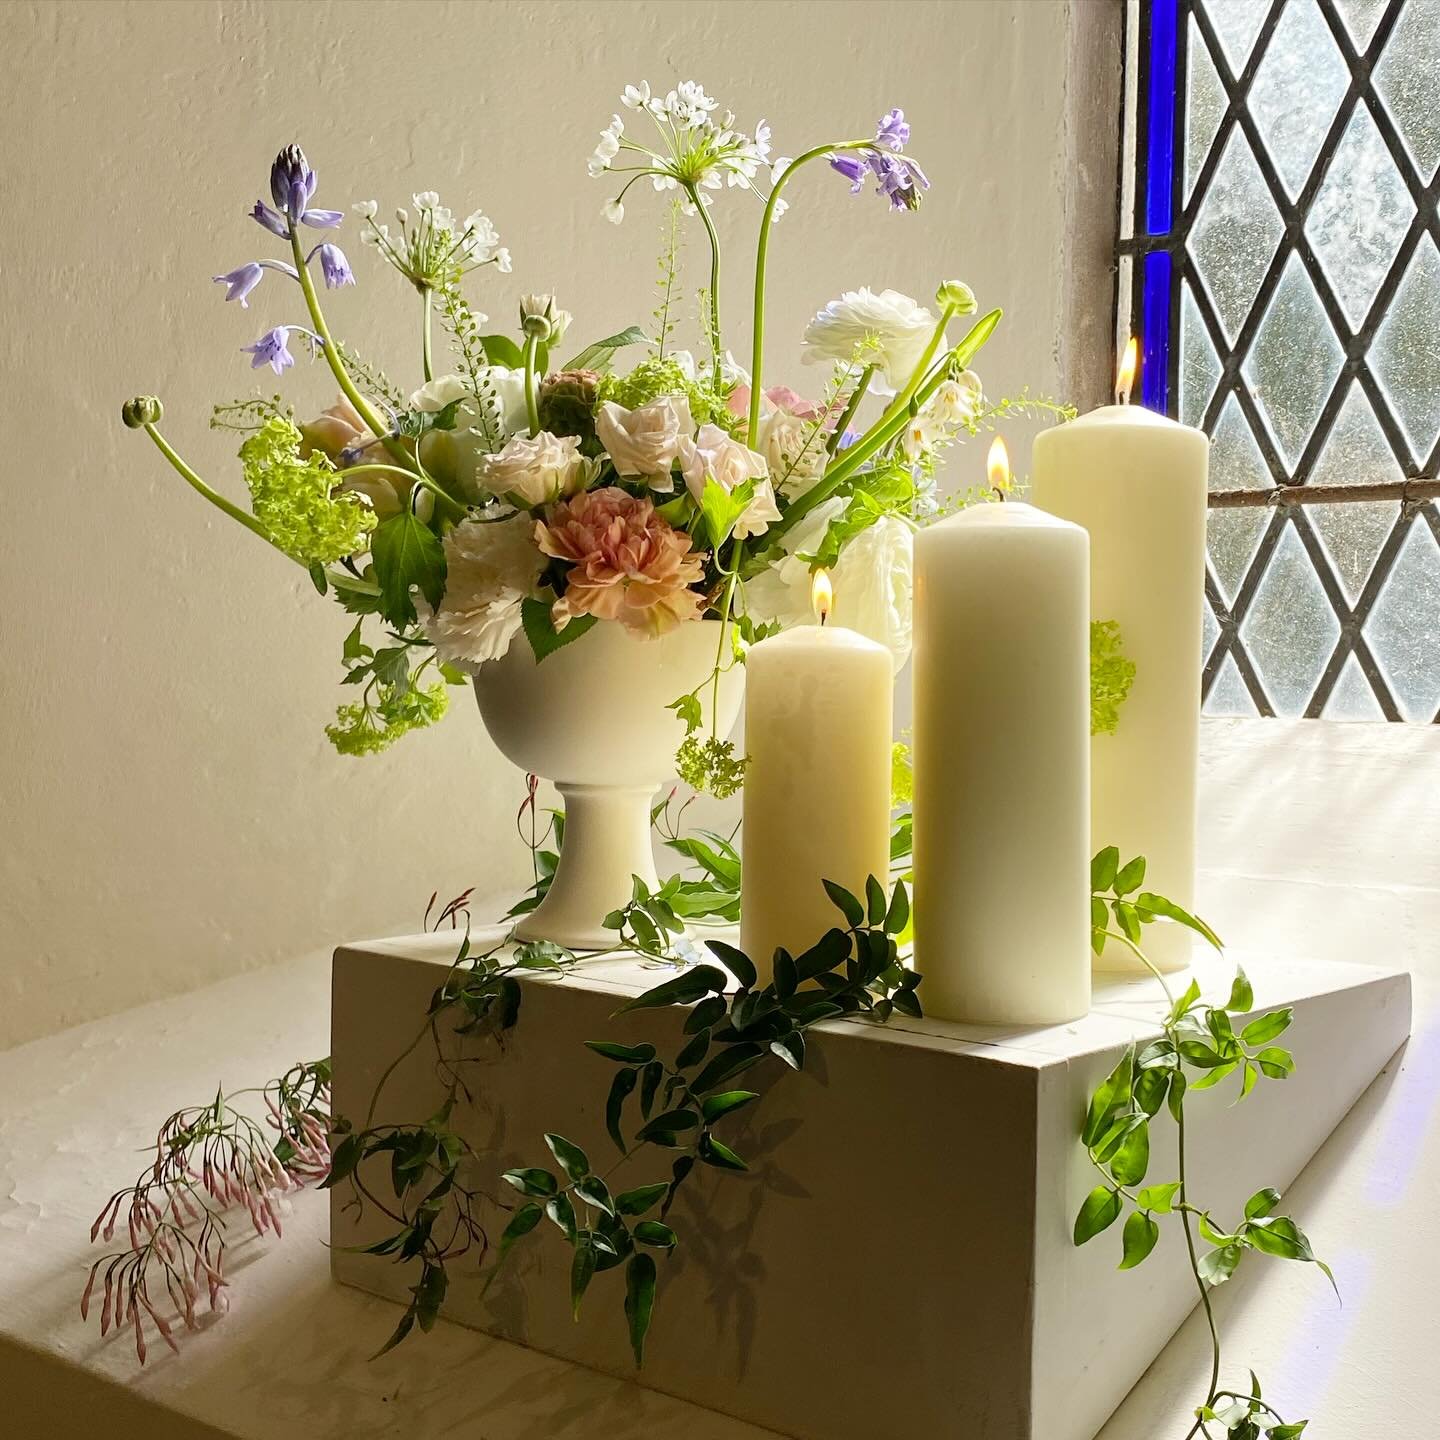 🕯️ c h u r c h 🕯️

The softest light in St Mary&rsquo;s Church streamed through the beautiful stained glass windows throwing a warm spring light upon the flowers ✨

#springlight #churchflowers #churchweddingflowers #springwedding #bucklebury